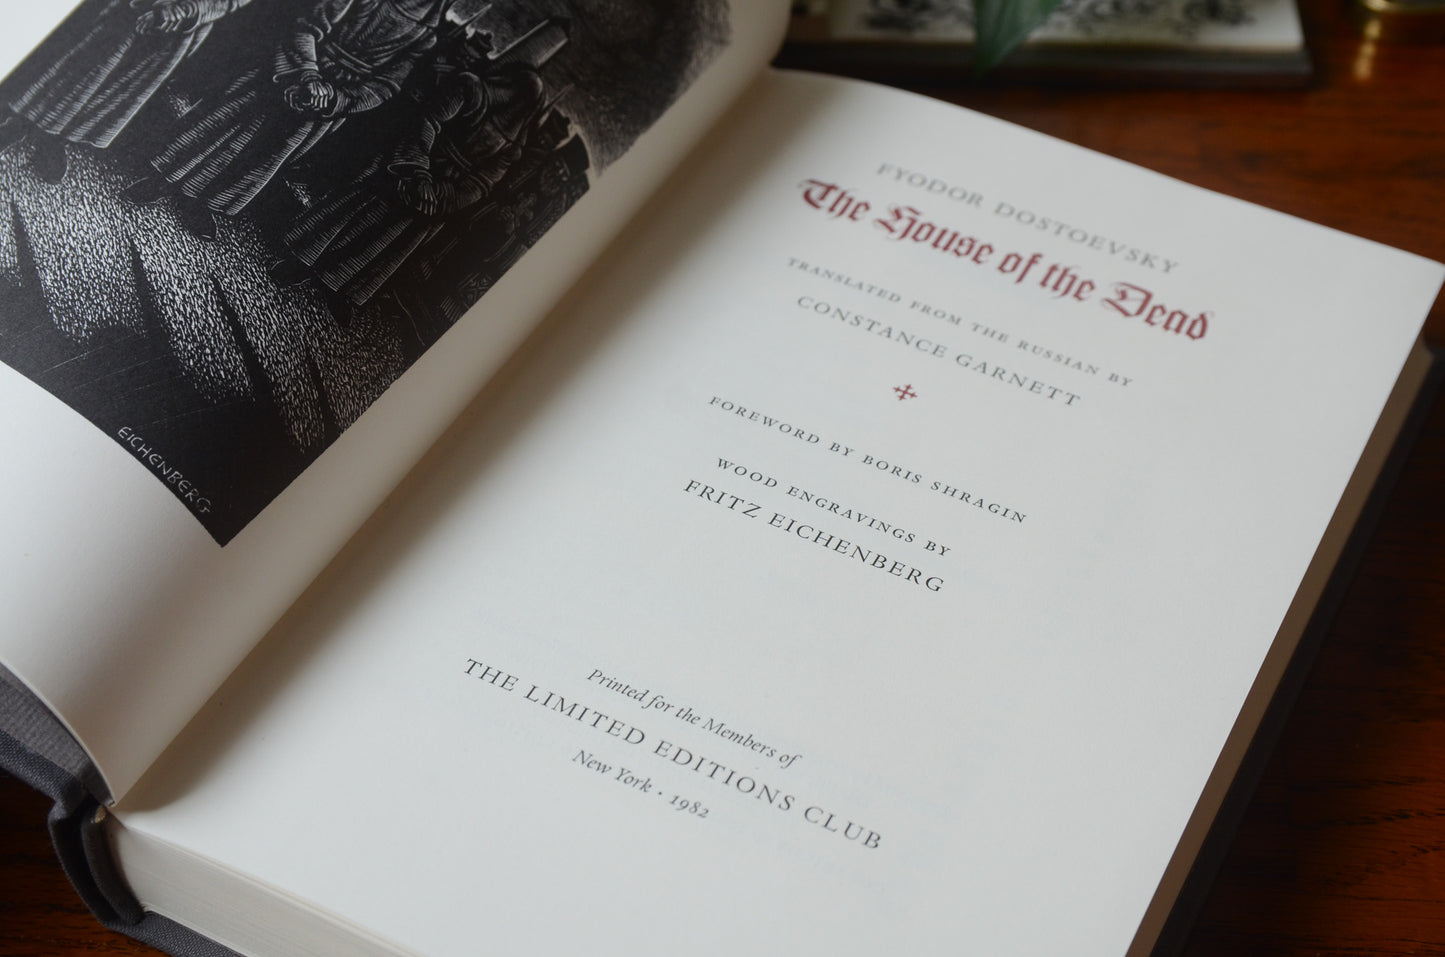 The Limited Editions Club: Dostoevsky's The House of The Dead / 1982